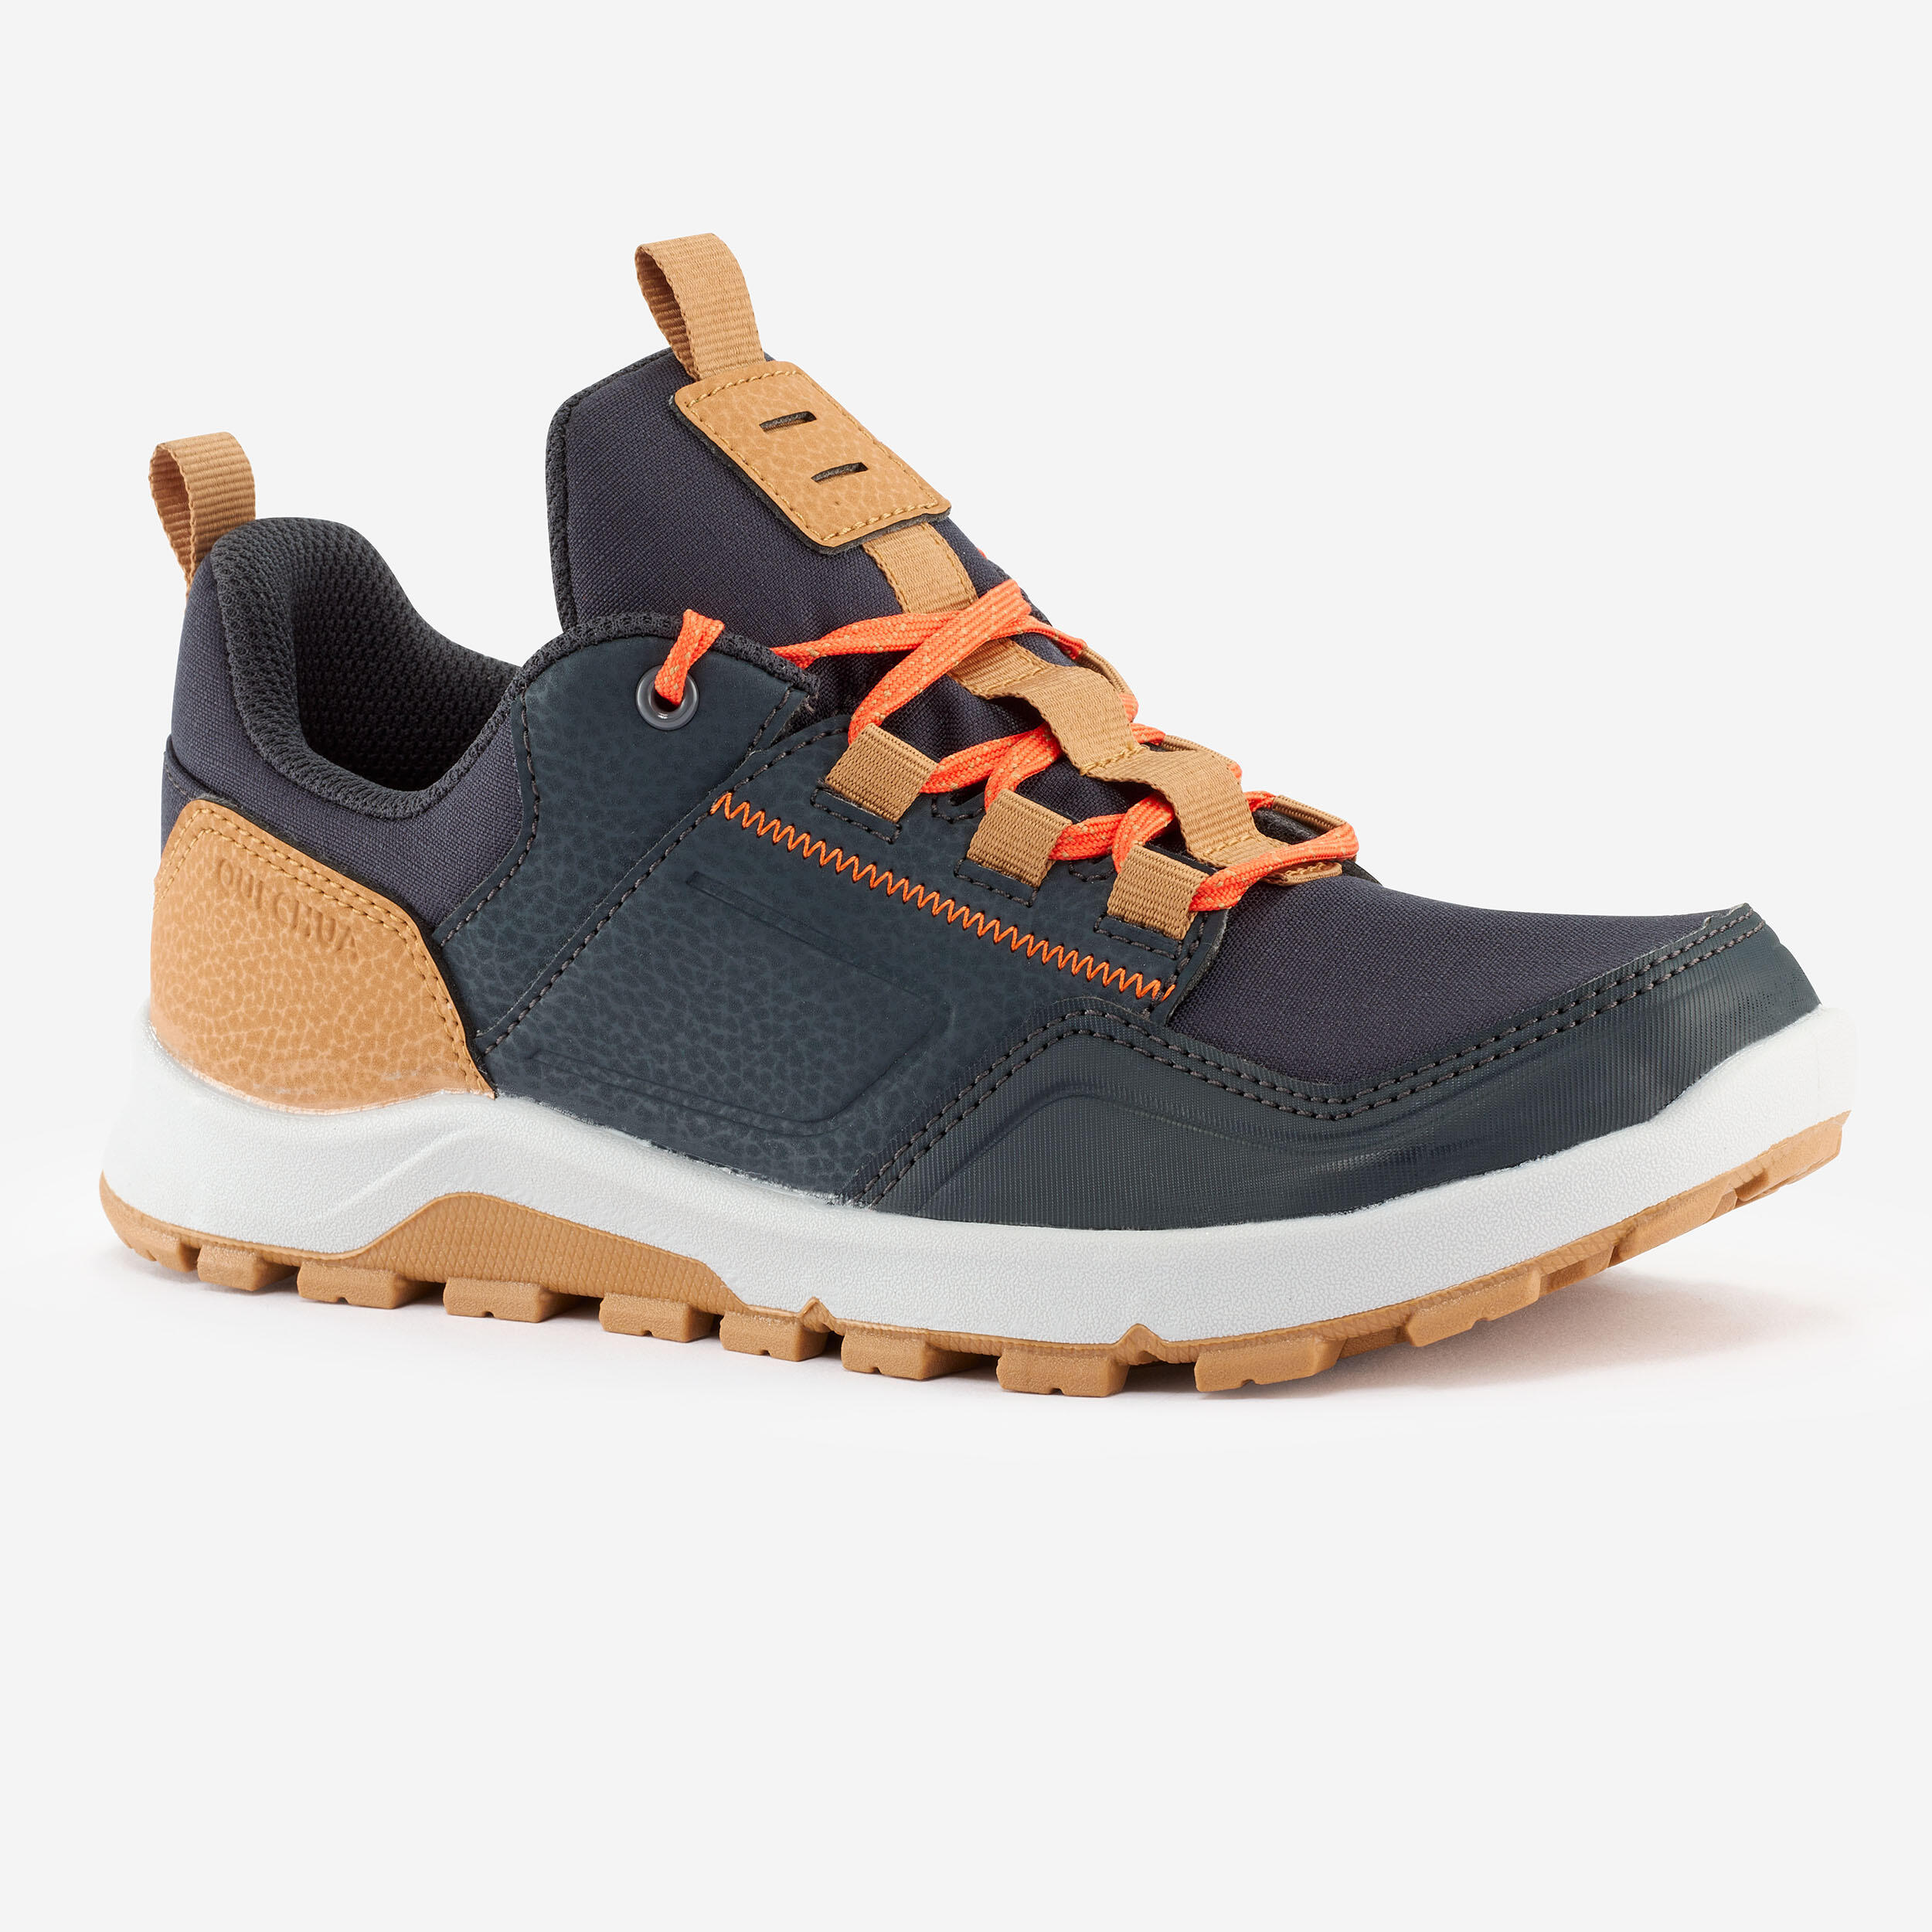 Kids’ Lace-Up Hiking Shoes